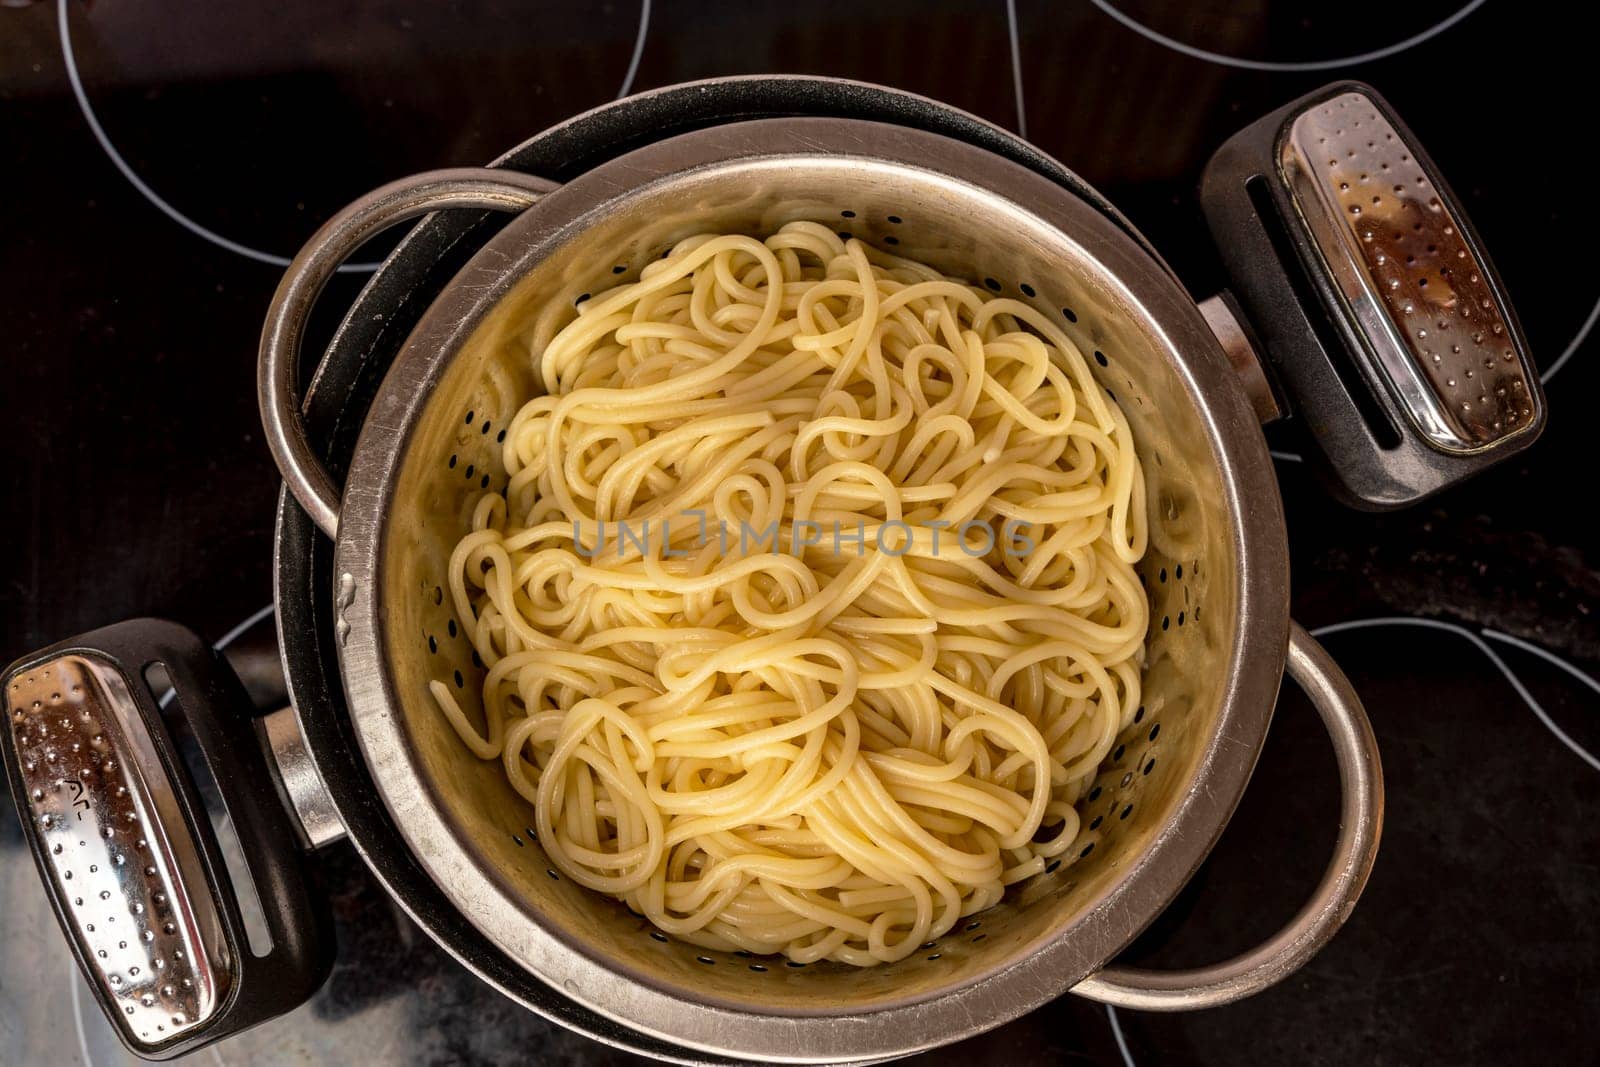 we cook ourselves. cooked ready-made spaghetti on the stove. boiled ready-made spaghetti toss in a colander. pot with spaghetti . cooking spaghetti. homemade Italian-style dinner. Pasta cooking. view from above